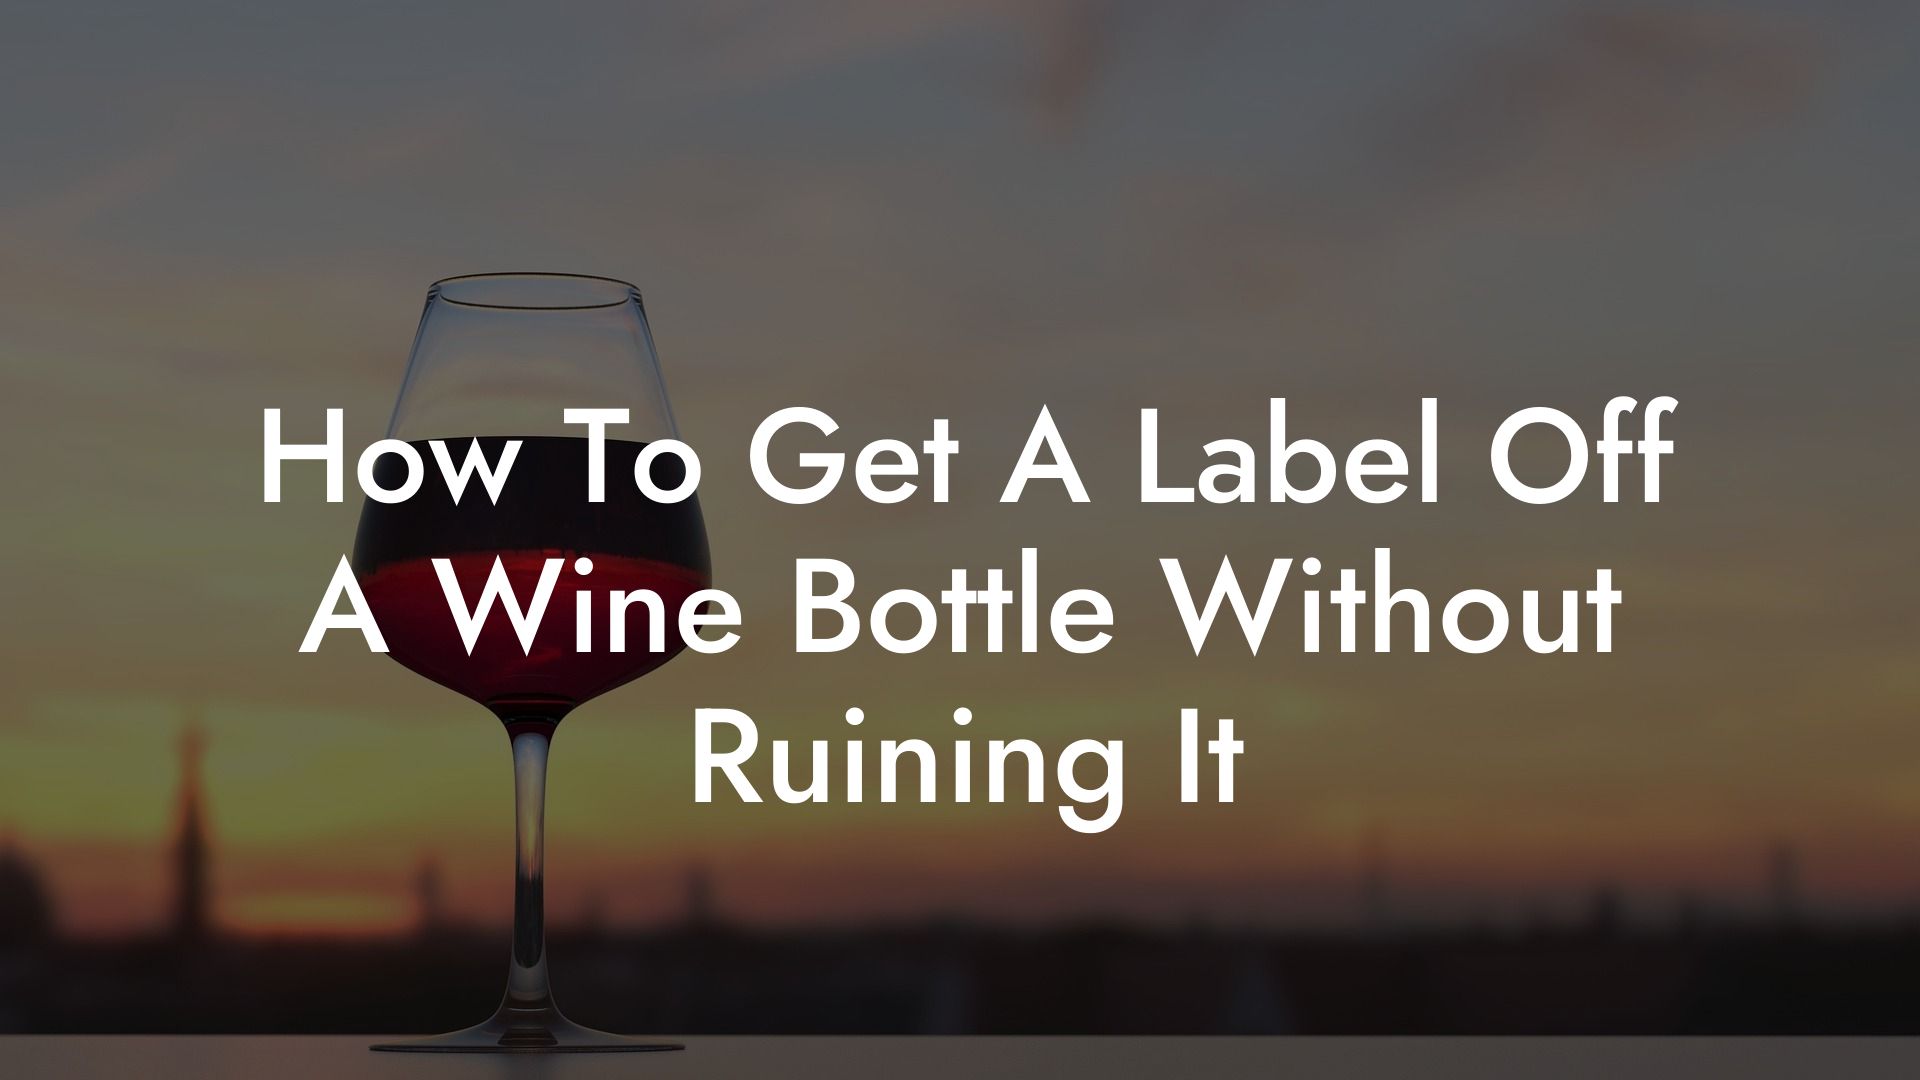 How To Get A Label Off A Wine Bottle Without Ruining It